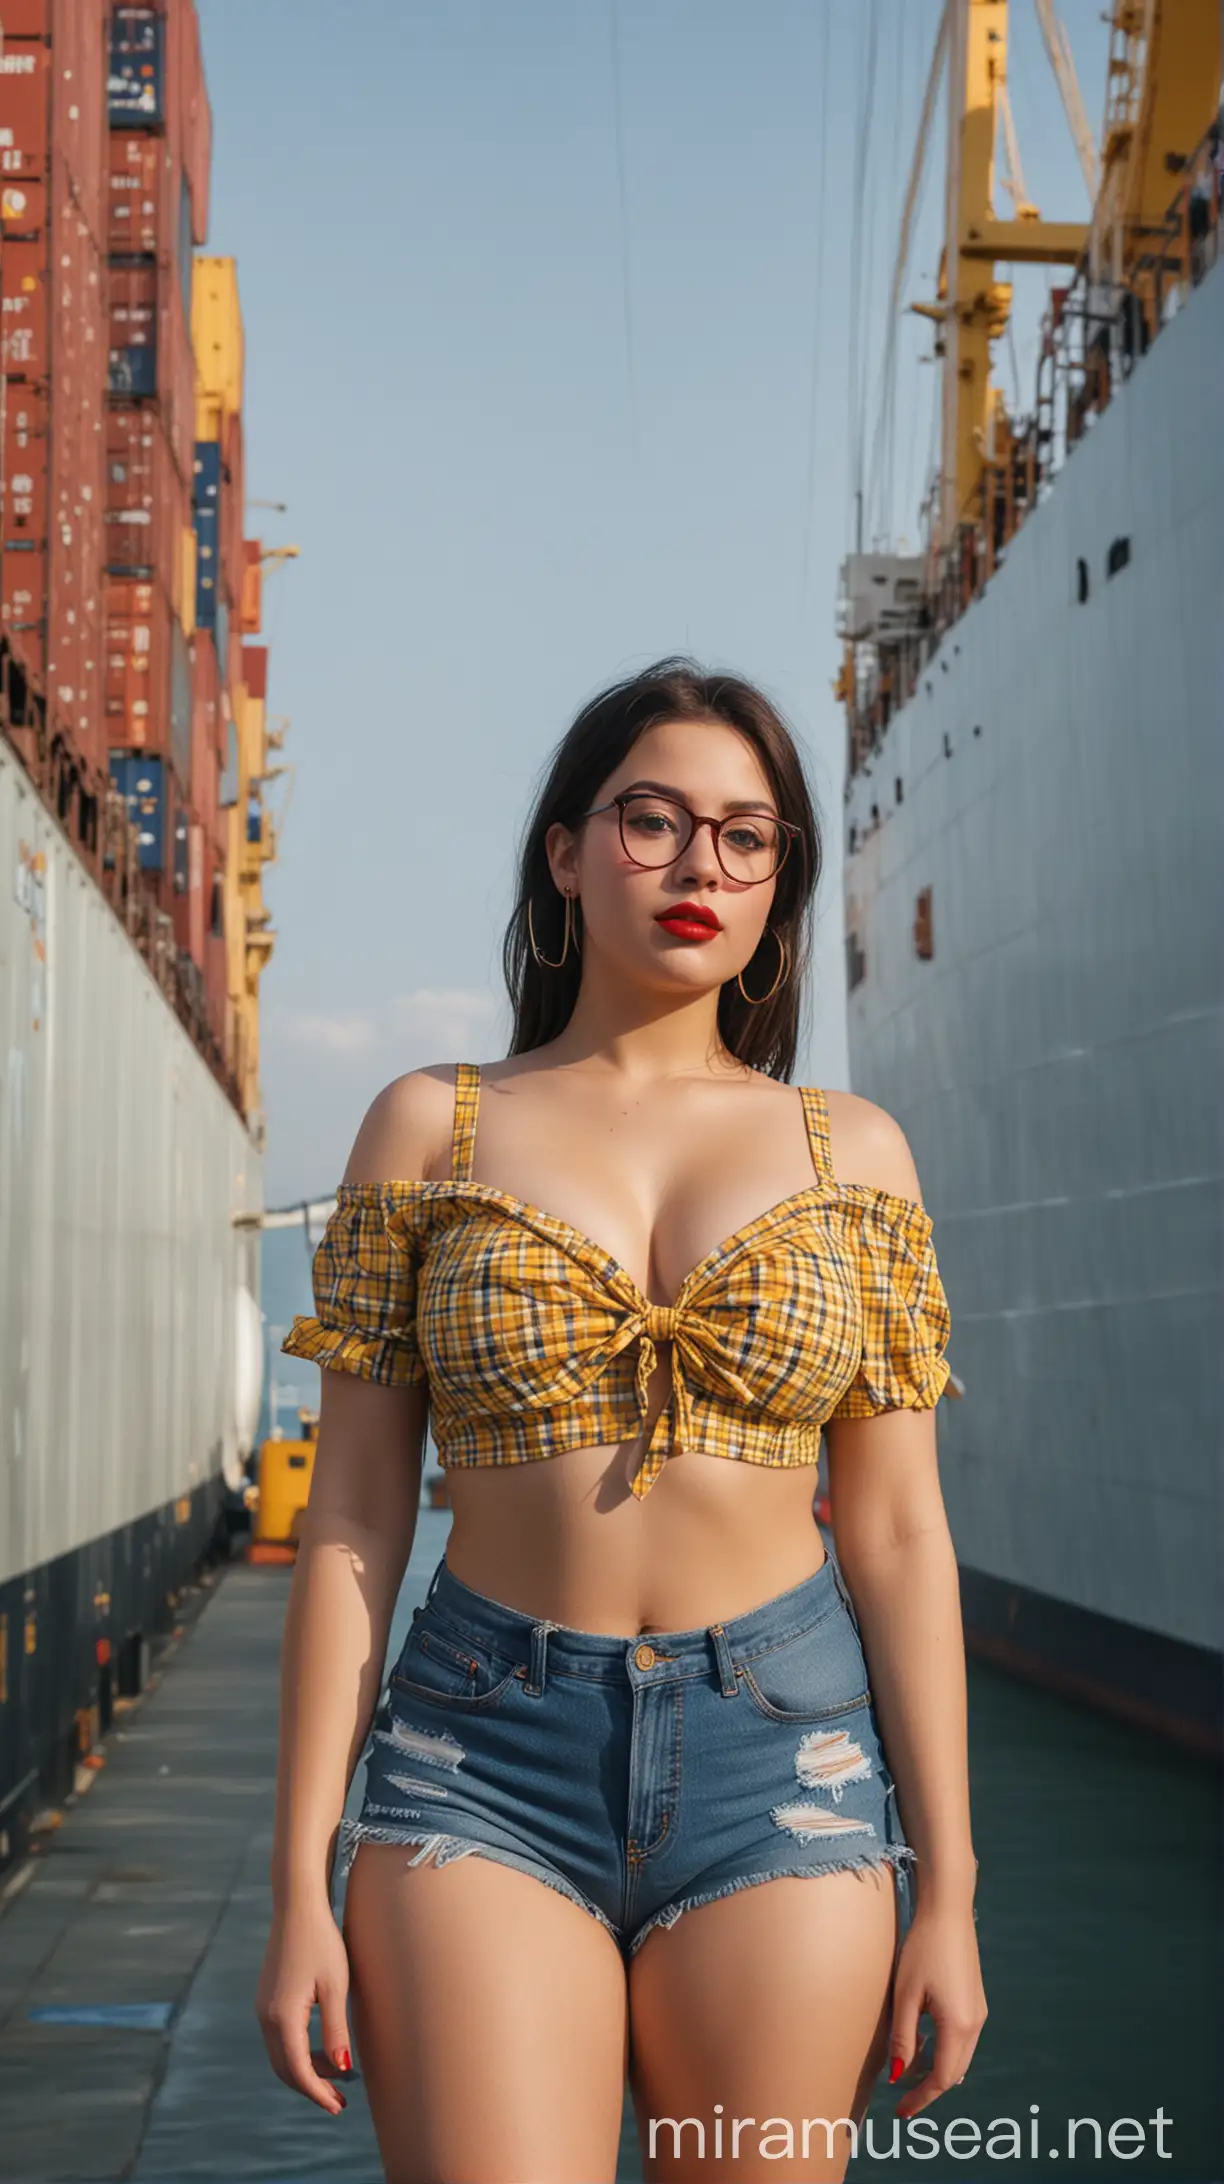 4k Ai art front view beautiful American curvy girl blue glasses red lipstick nose ring ear tops hot mini shorts and yellow check shirt and golden bra big round tits in usa big container ship corner